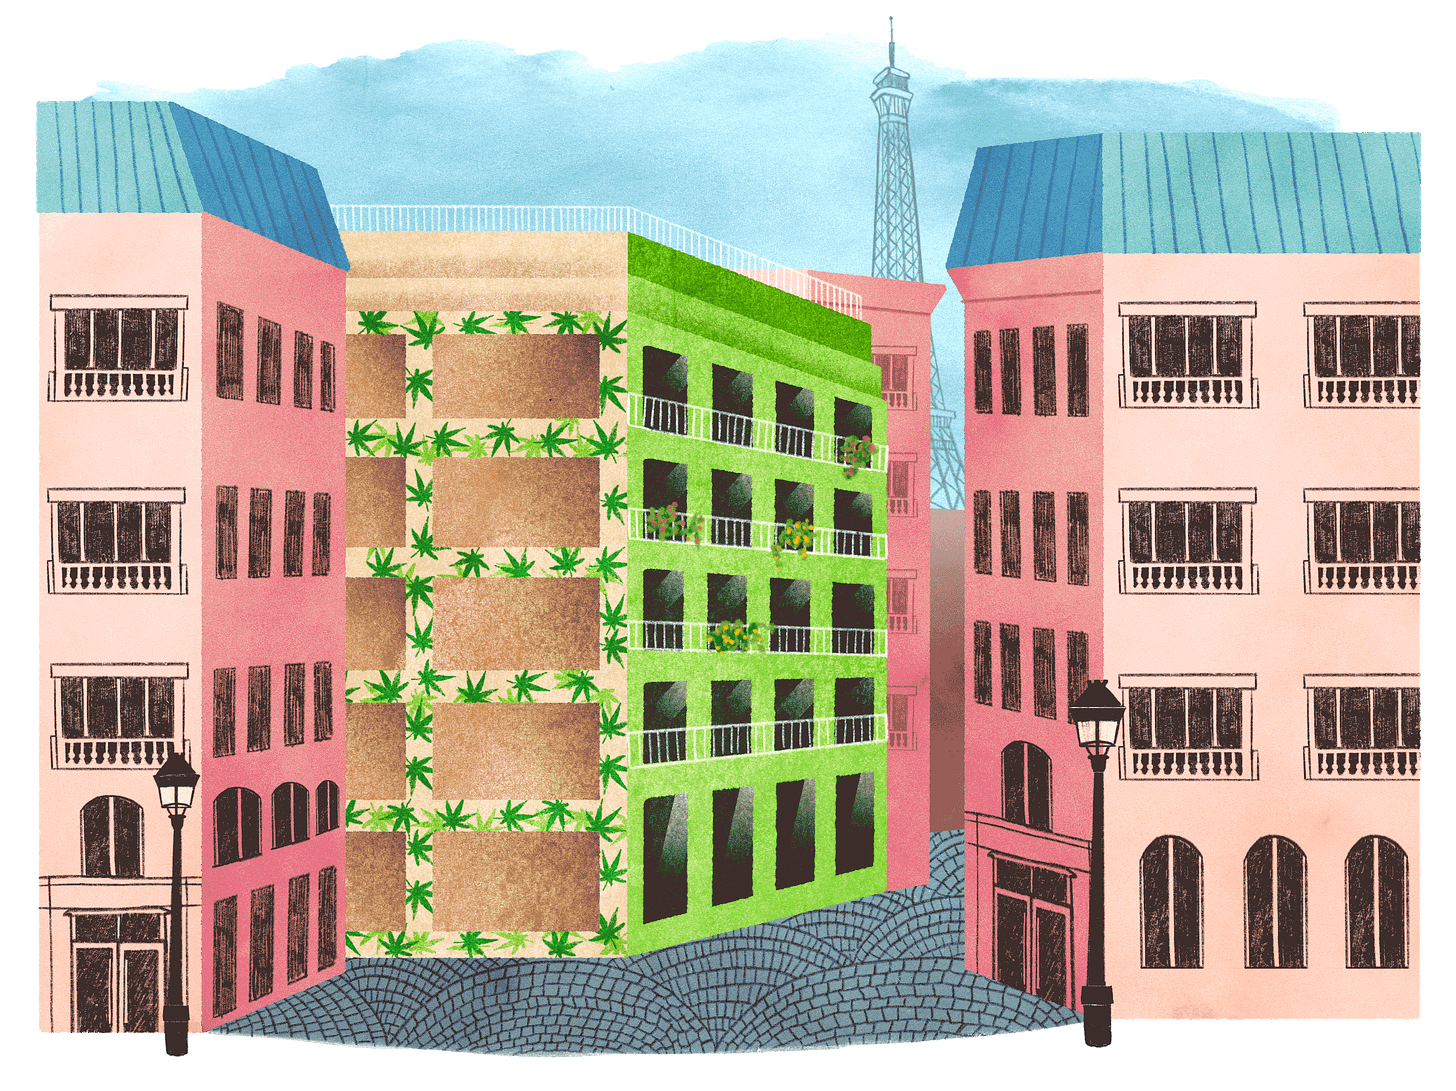 an illustration of a street in Paris with a row of buildings. In the center, the building is slightly green with cannabis leaves on the outside.